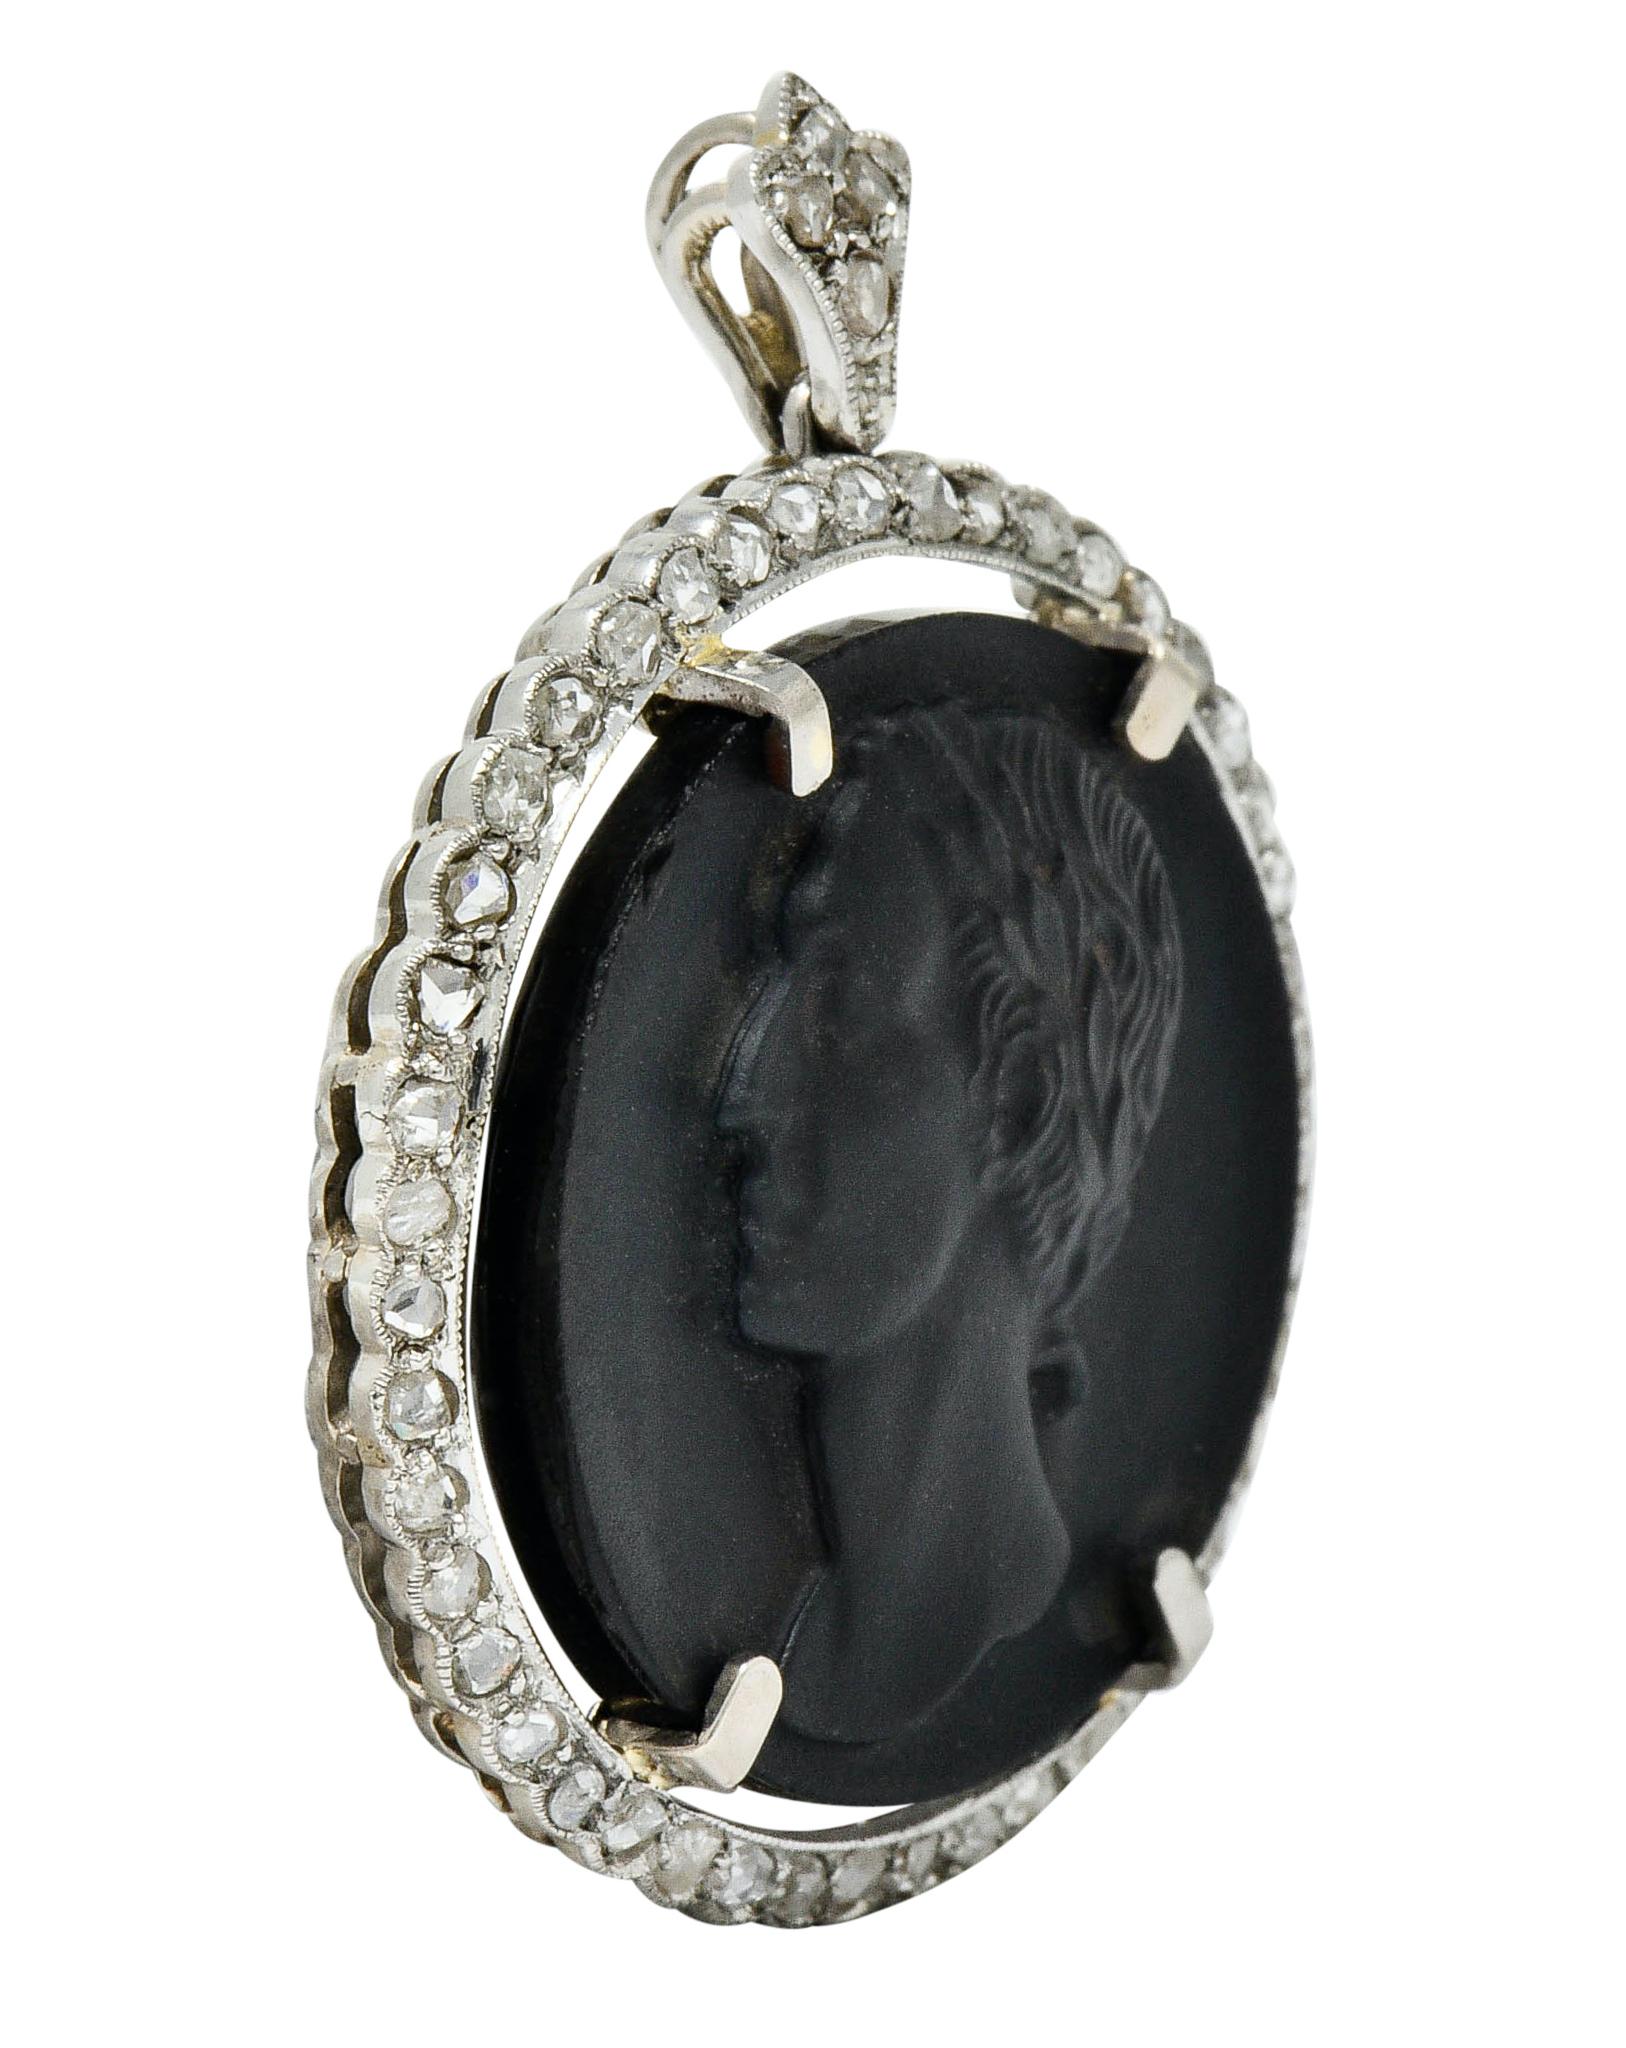 Centering a 22.0 mm circular tablet of matte finished onyx

Intricately carved to depict a cameo bust of Julius Caesar adorned in laurels

Surrounded by a scalloped platinum border accented by rose cut diamonds

Weighing in total approximately 0.65